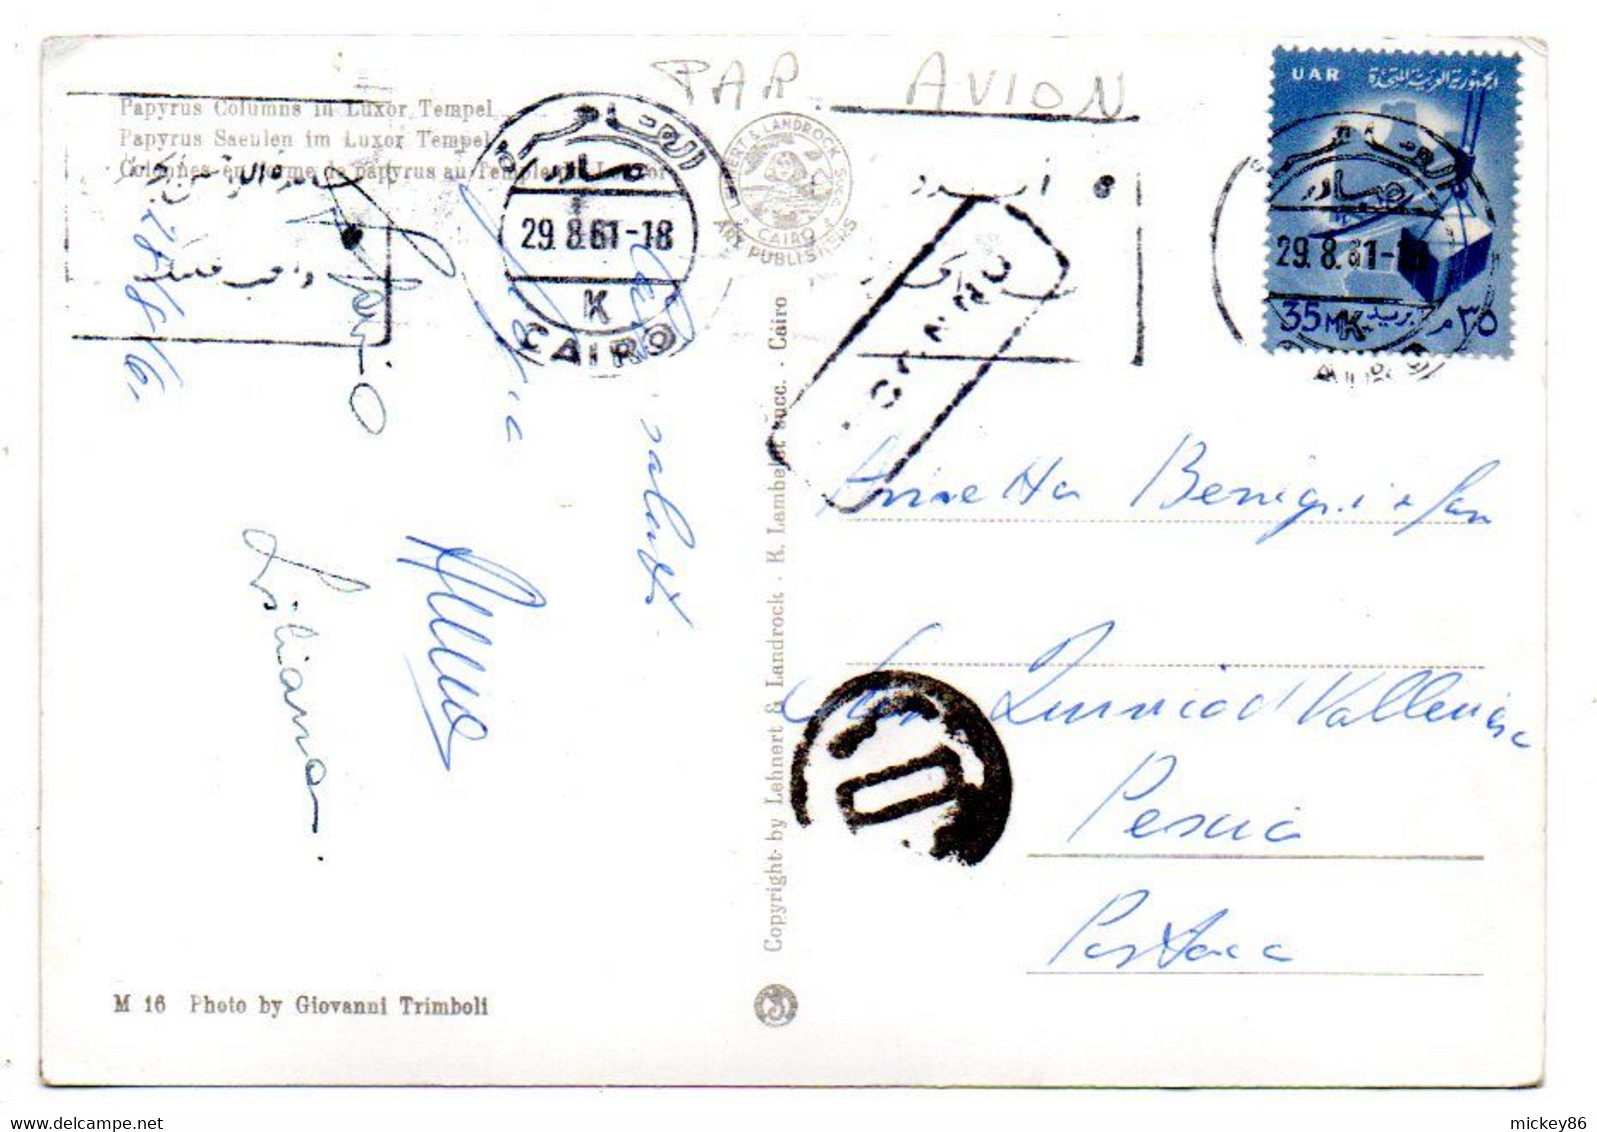 Egypte --  LUXOR--1961-- Papyrus Columna--Temple .........timbre.............cachet  CAIRO .....griffe INCONNU-- - Covers & Documents